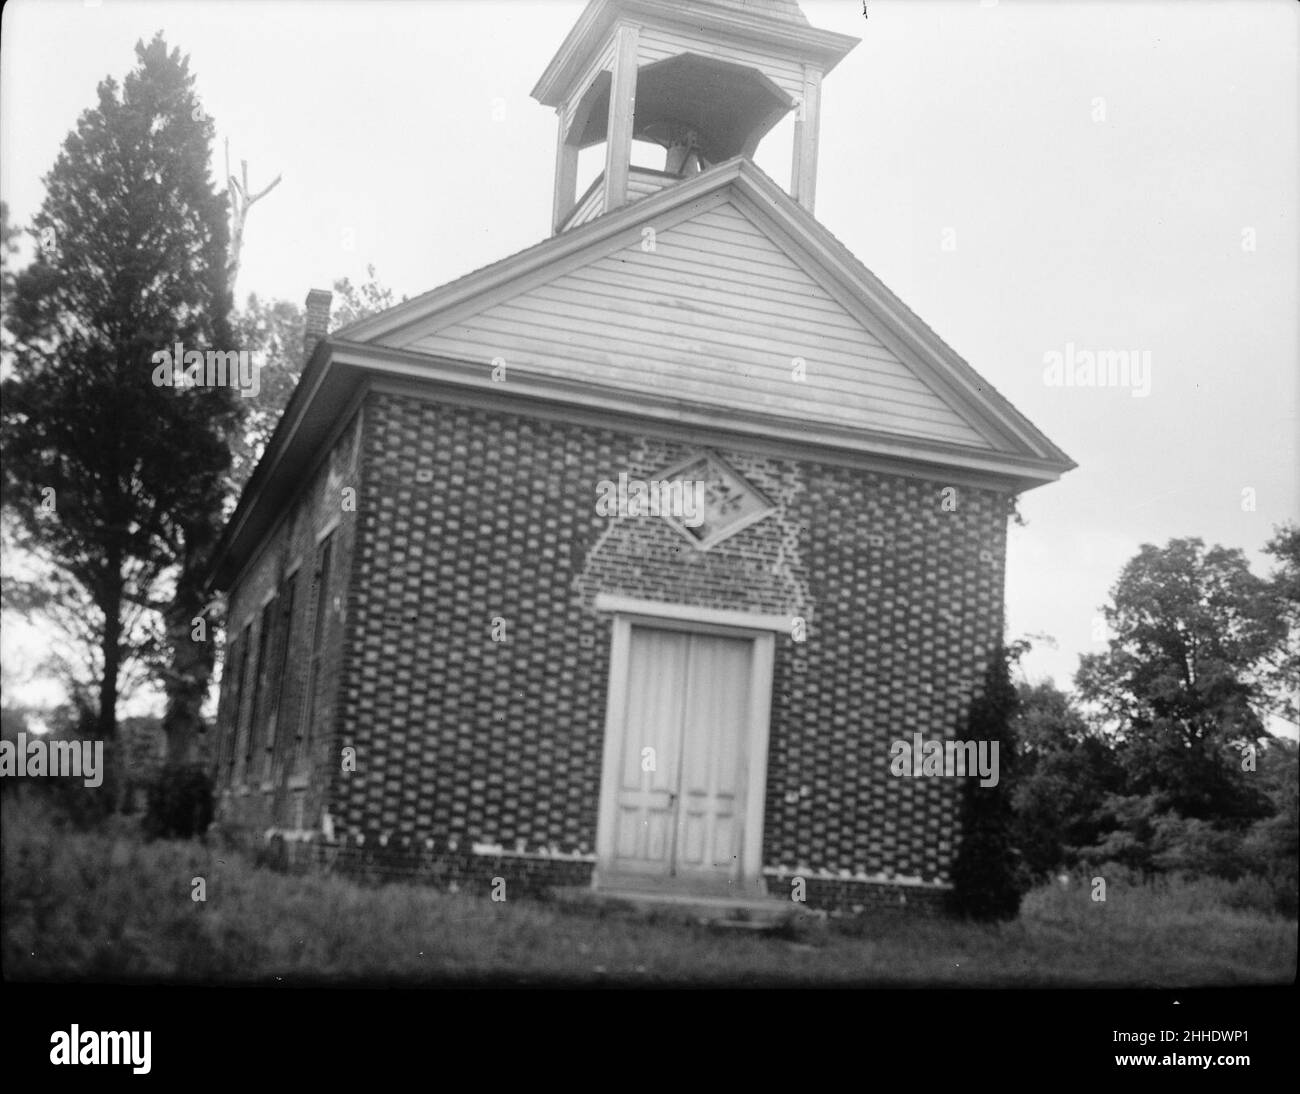 St. George's Church, State Route 178, Pungoteague, Accomack County, VA. Stockfoto